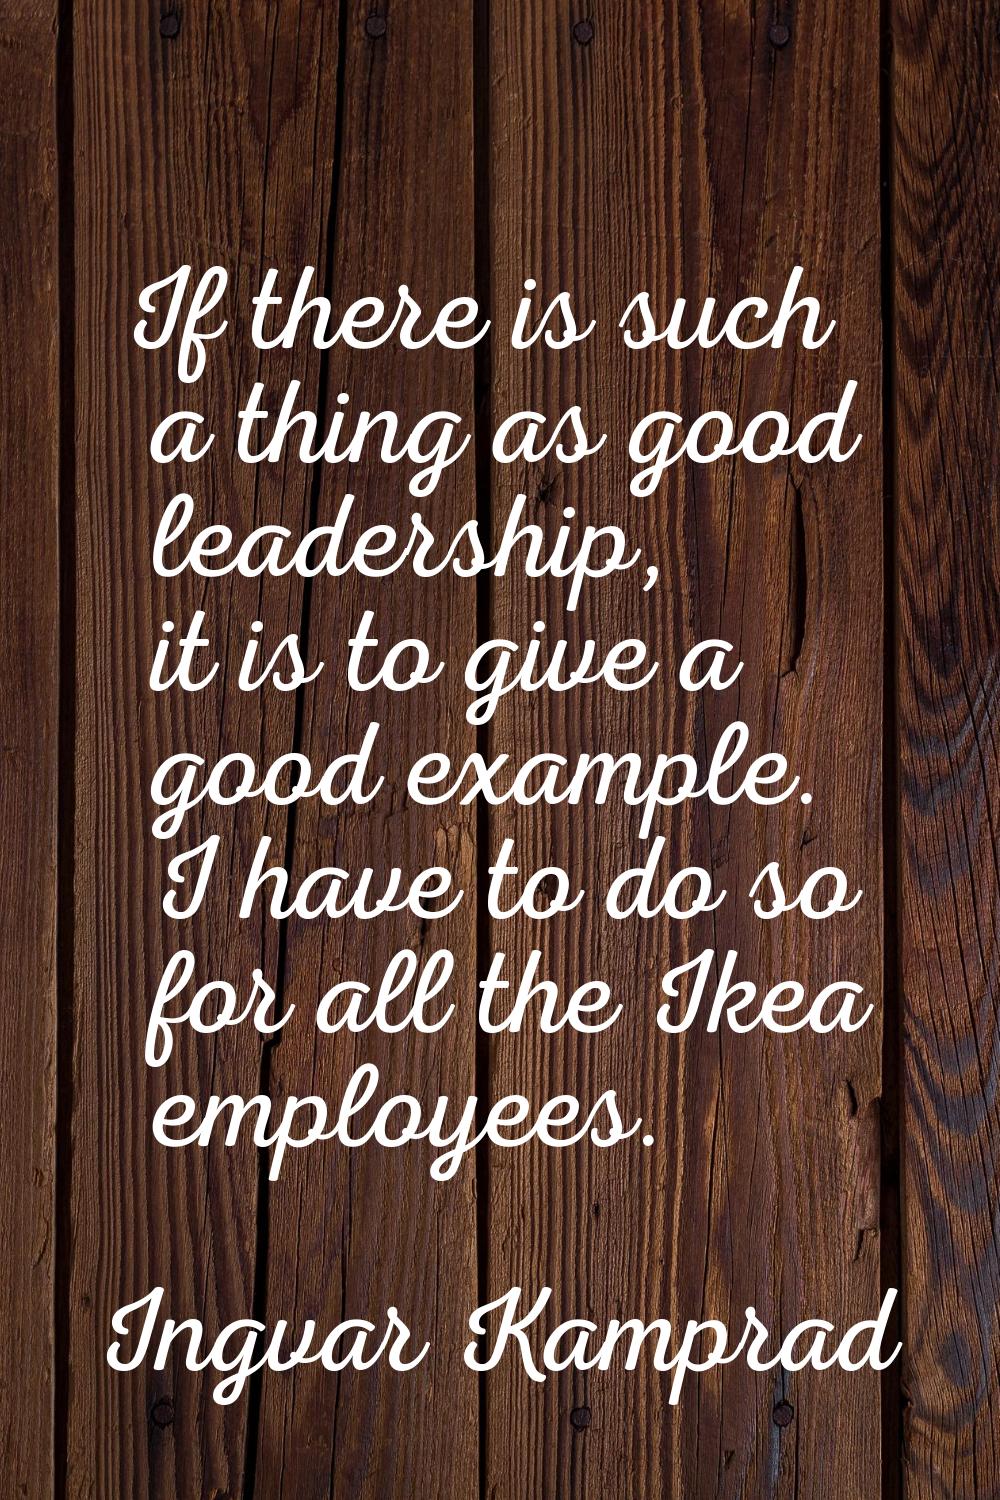 If there is such a thing as good leadership, it is to give a good example. I have to do so for all 